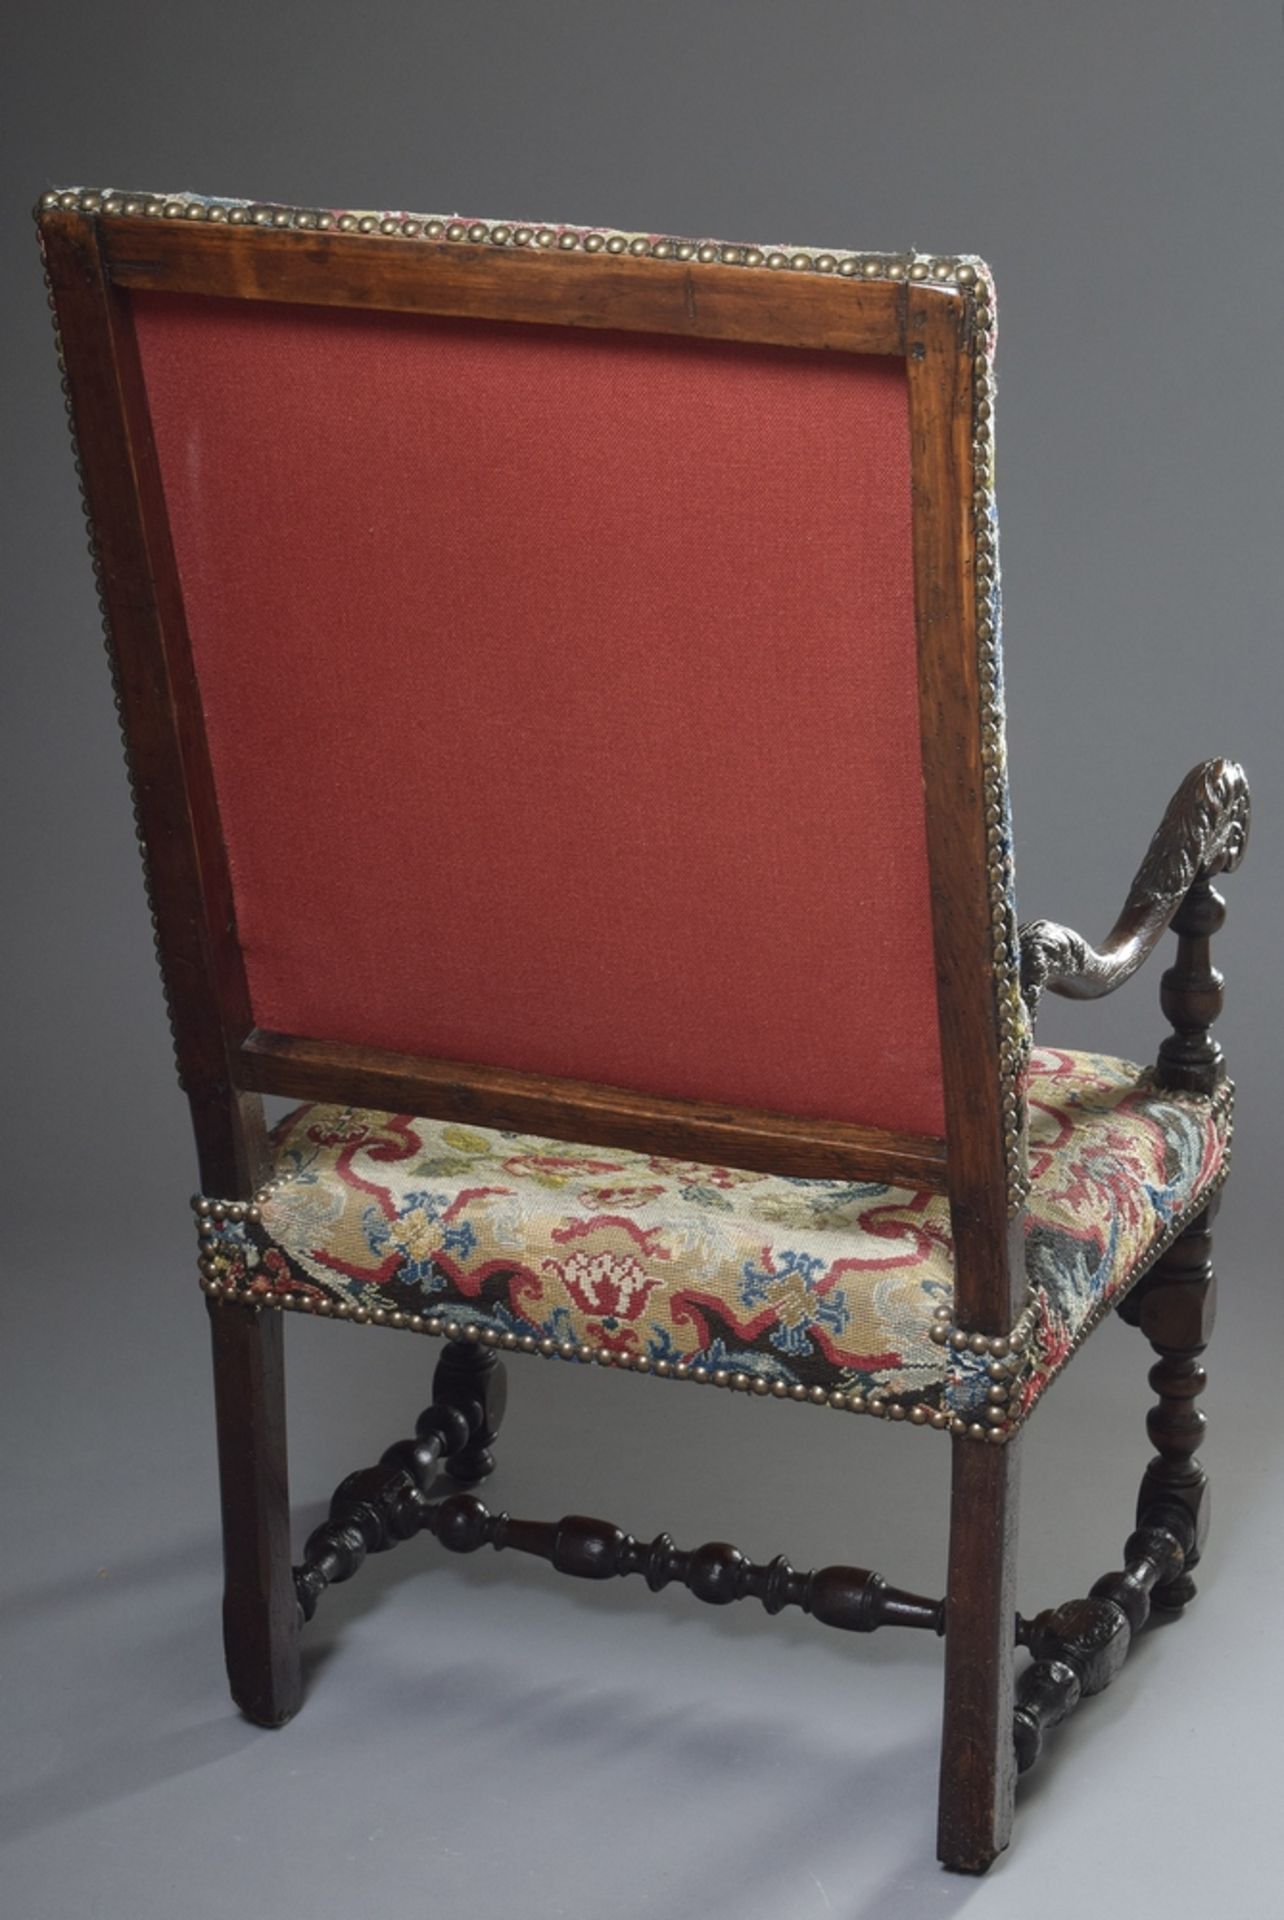 Baroque armchair with floral carved and turned frame, straight backrest and fine embroidered uphols - Image 2 of 4